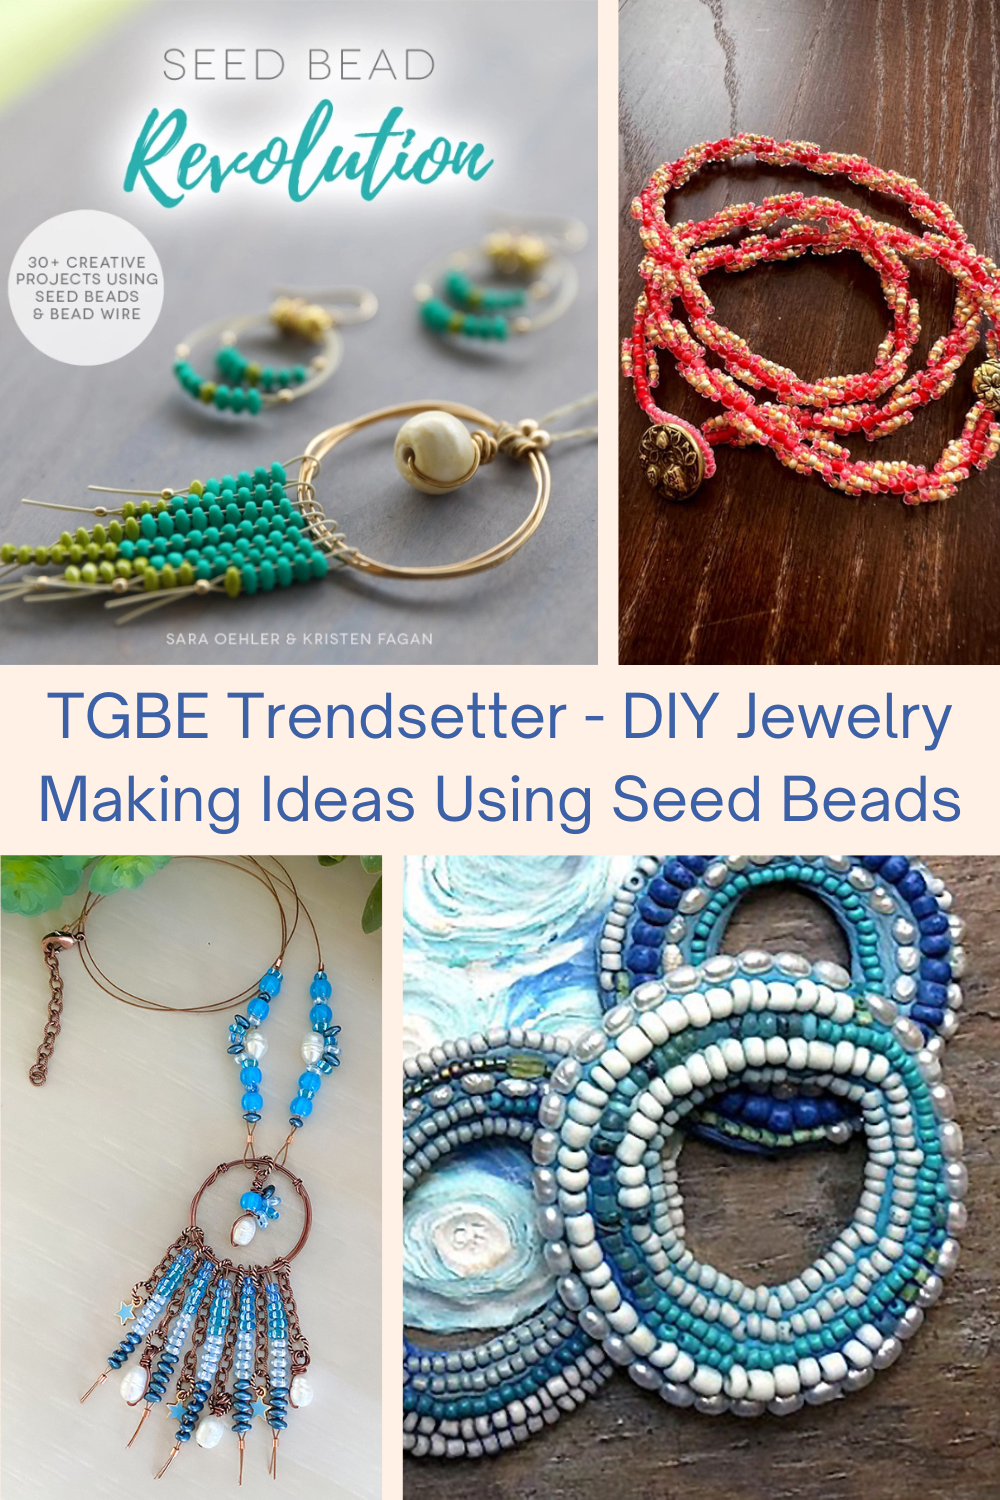 TGBE Trendsetter - DIY Jewelry Making Ideas Using Seed Beads Collage